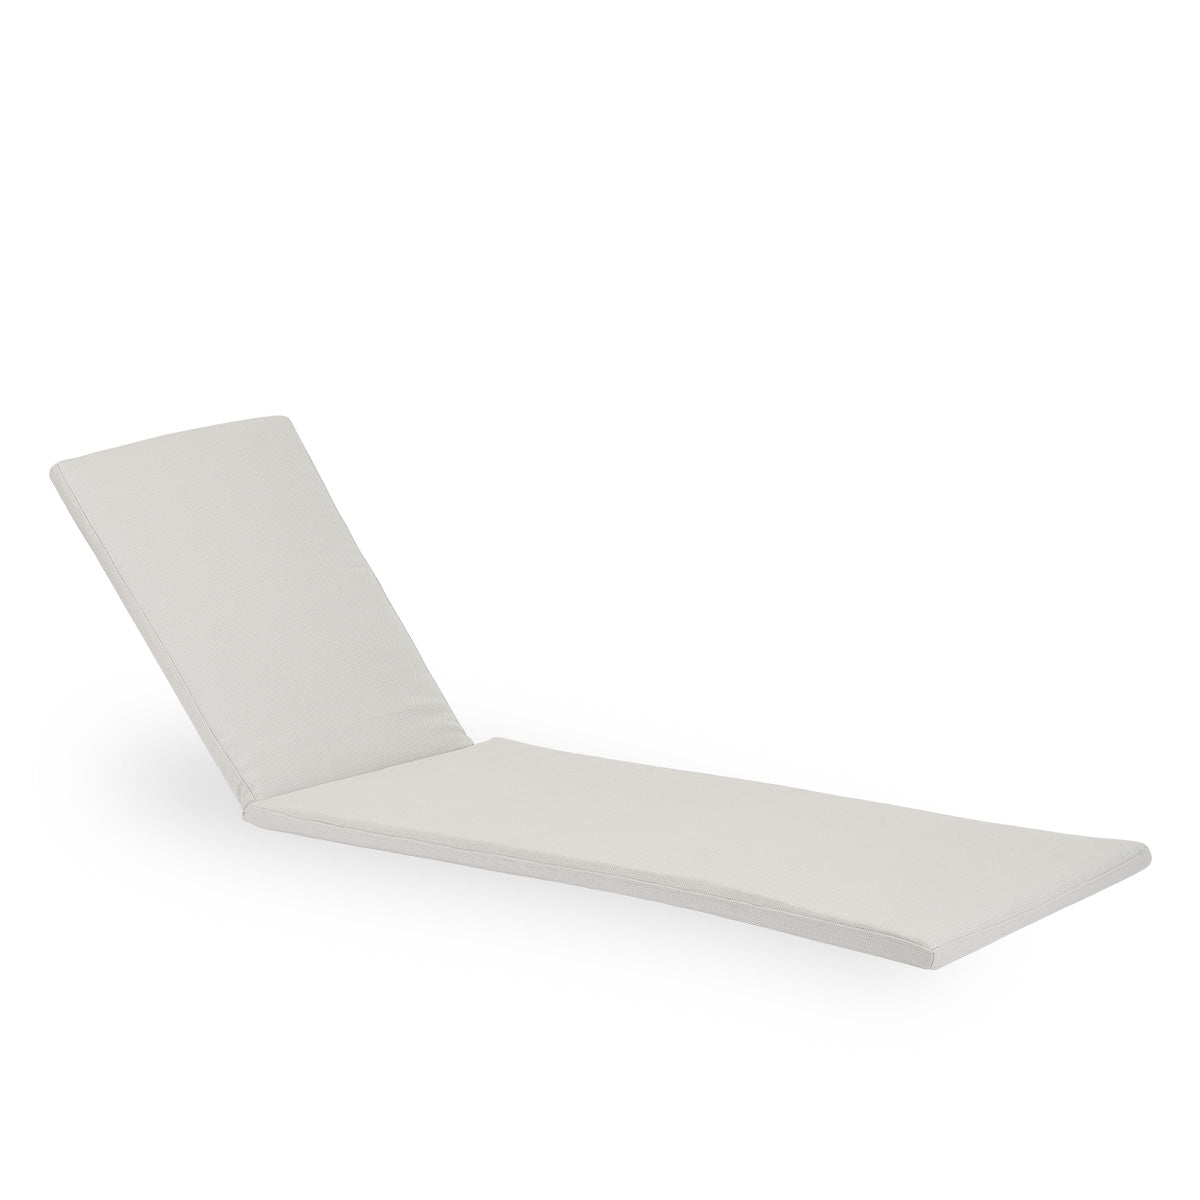 Josephine Exterior Sunbed | Seat & back cushion by Sika